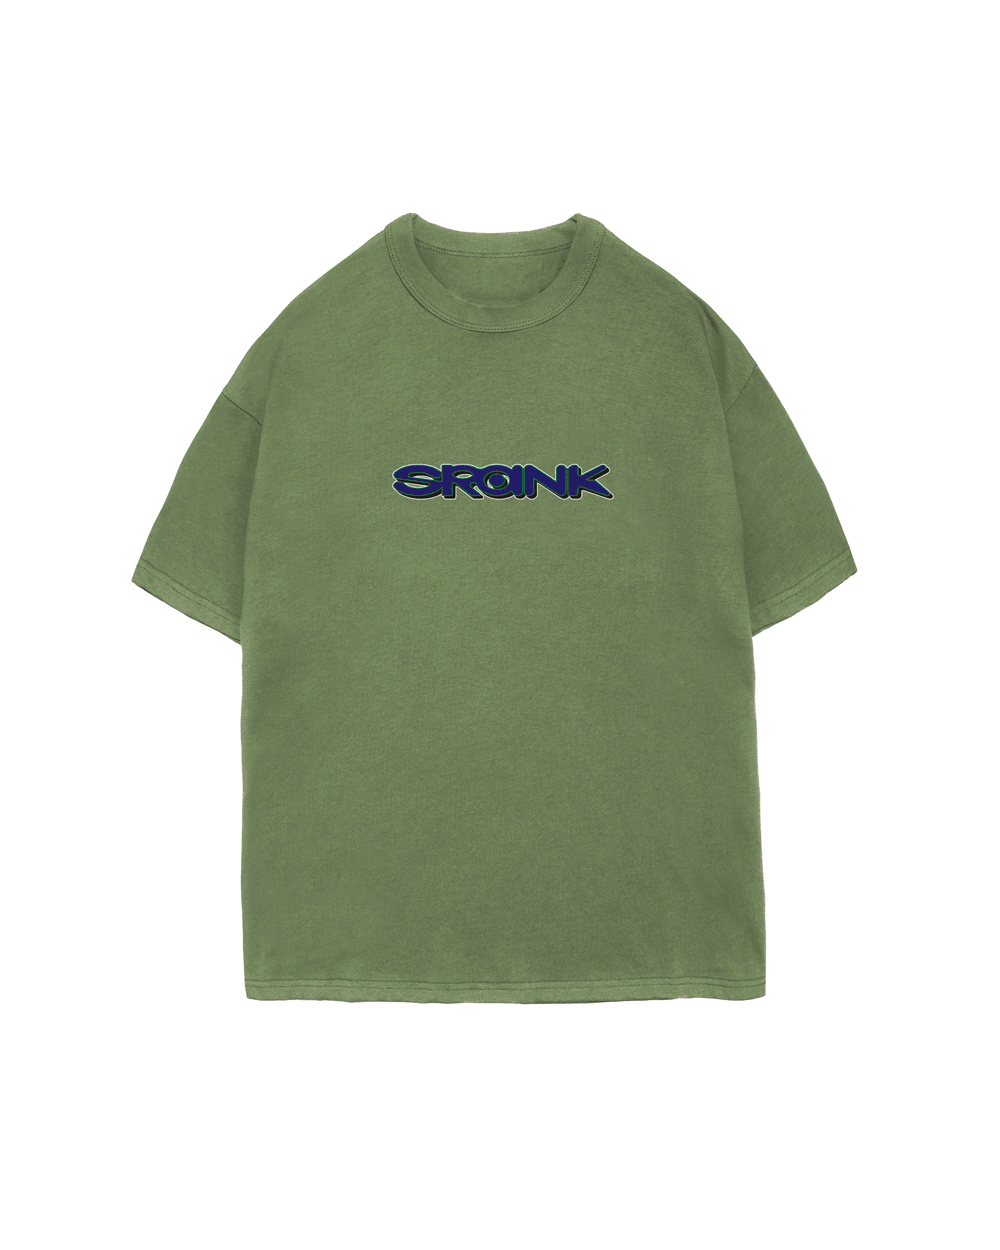 A-TWIN TEE [mystery color]